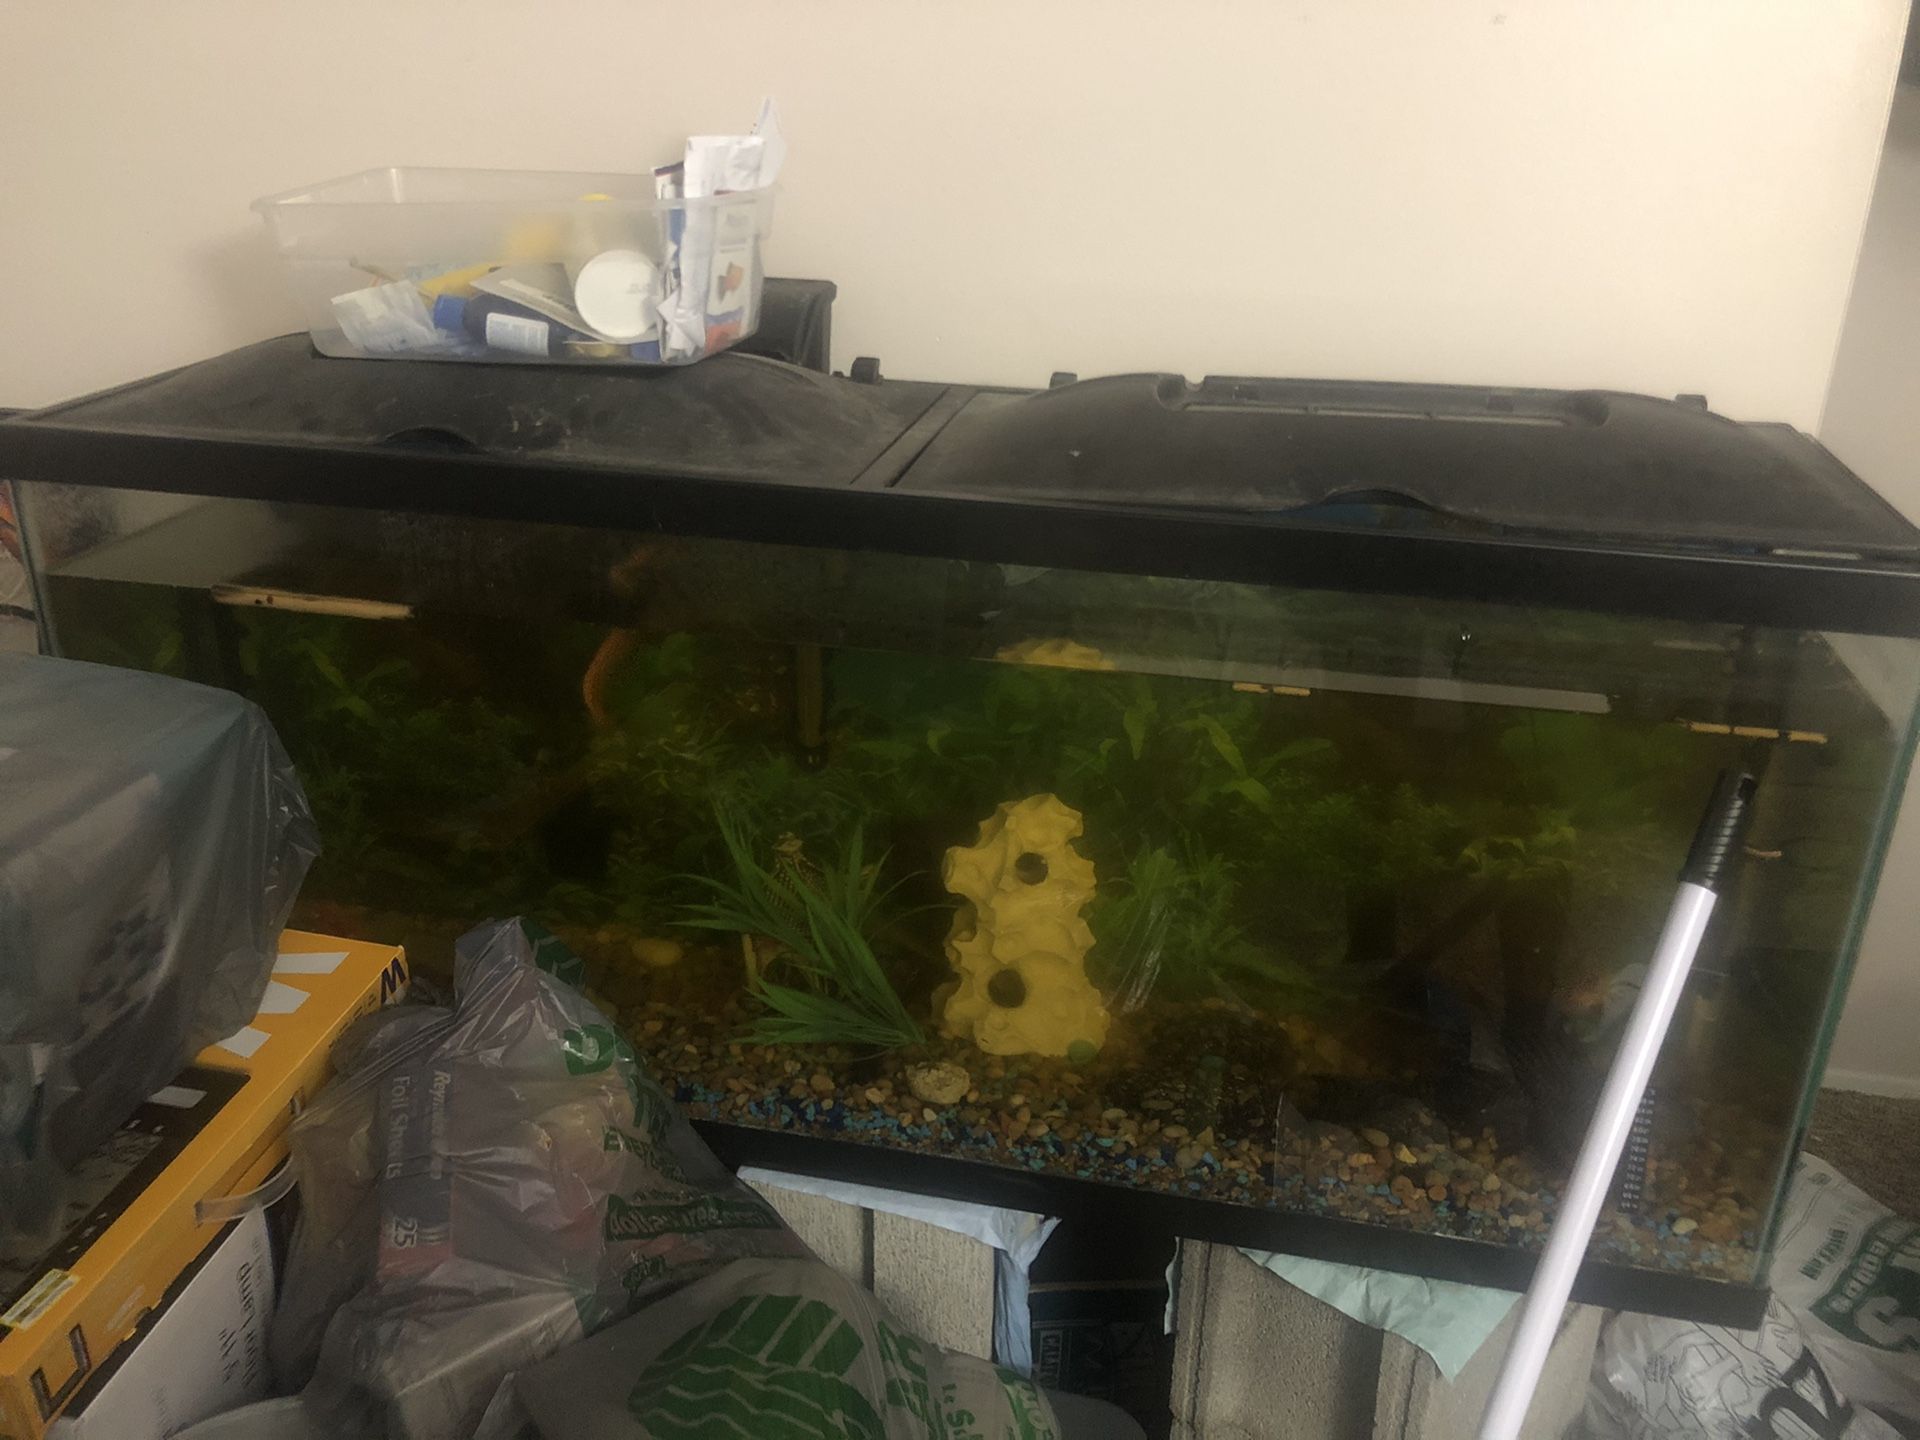 Selling my fish with tanks, one 50 gallon and one 30 gallon